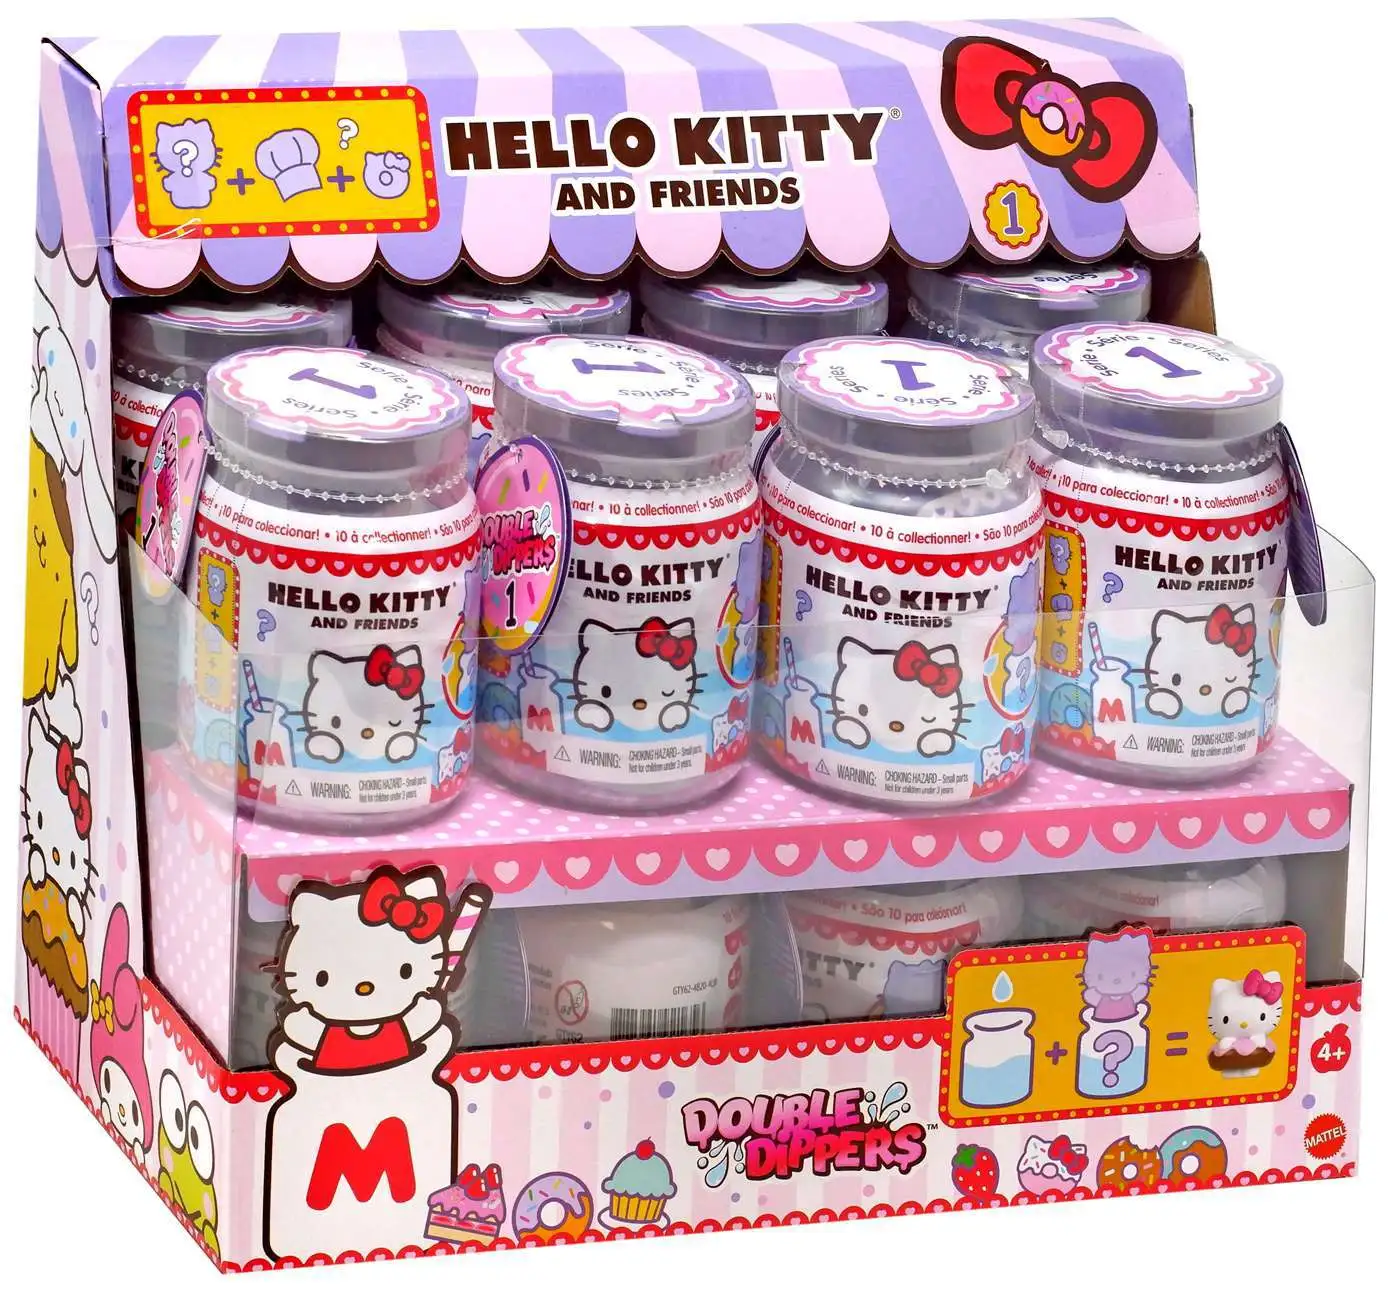 Sanrio Hello Kitty Strawberry Cake Letter Sets Brand-New Pack